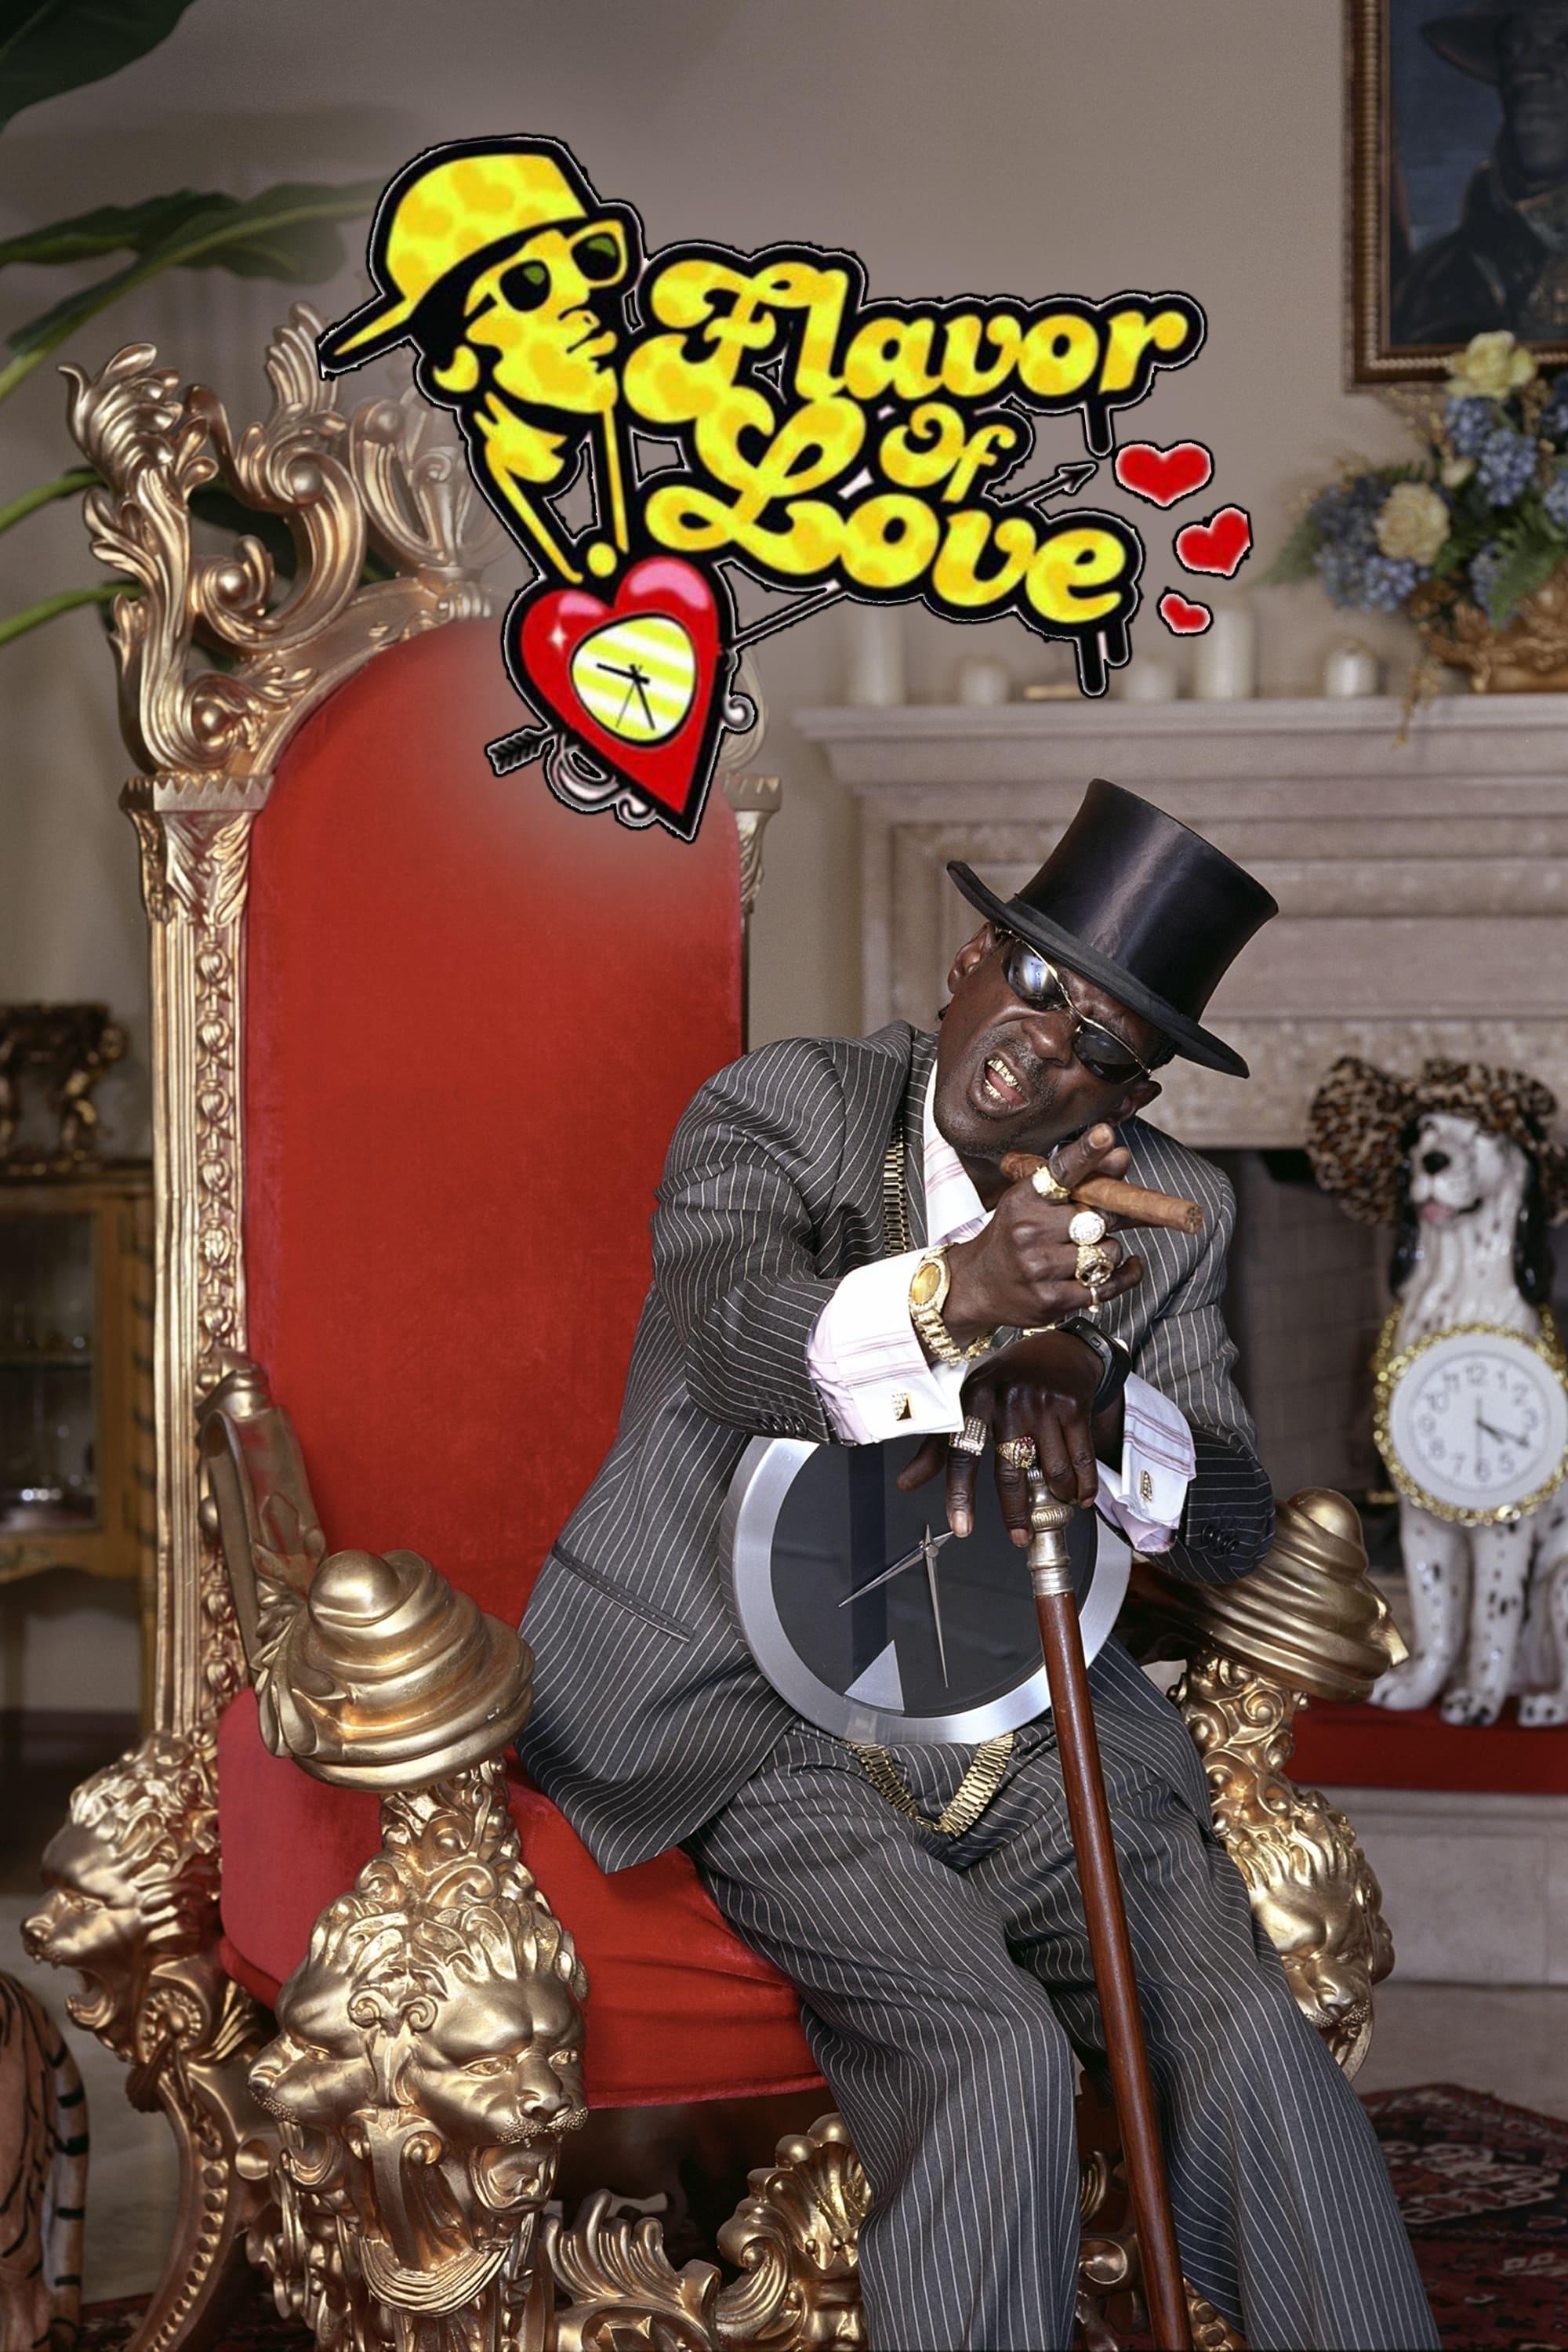 Flavor of Love poster